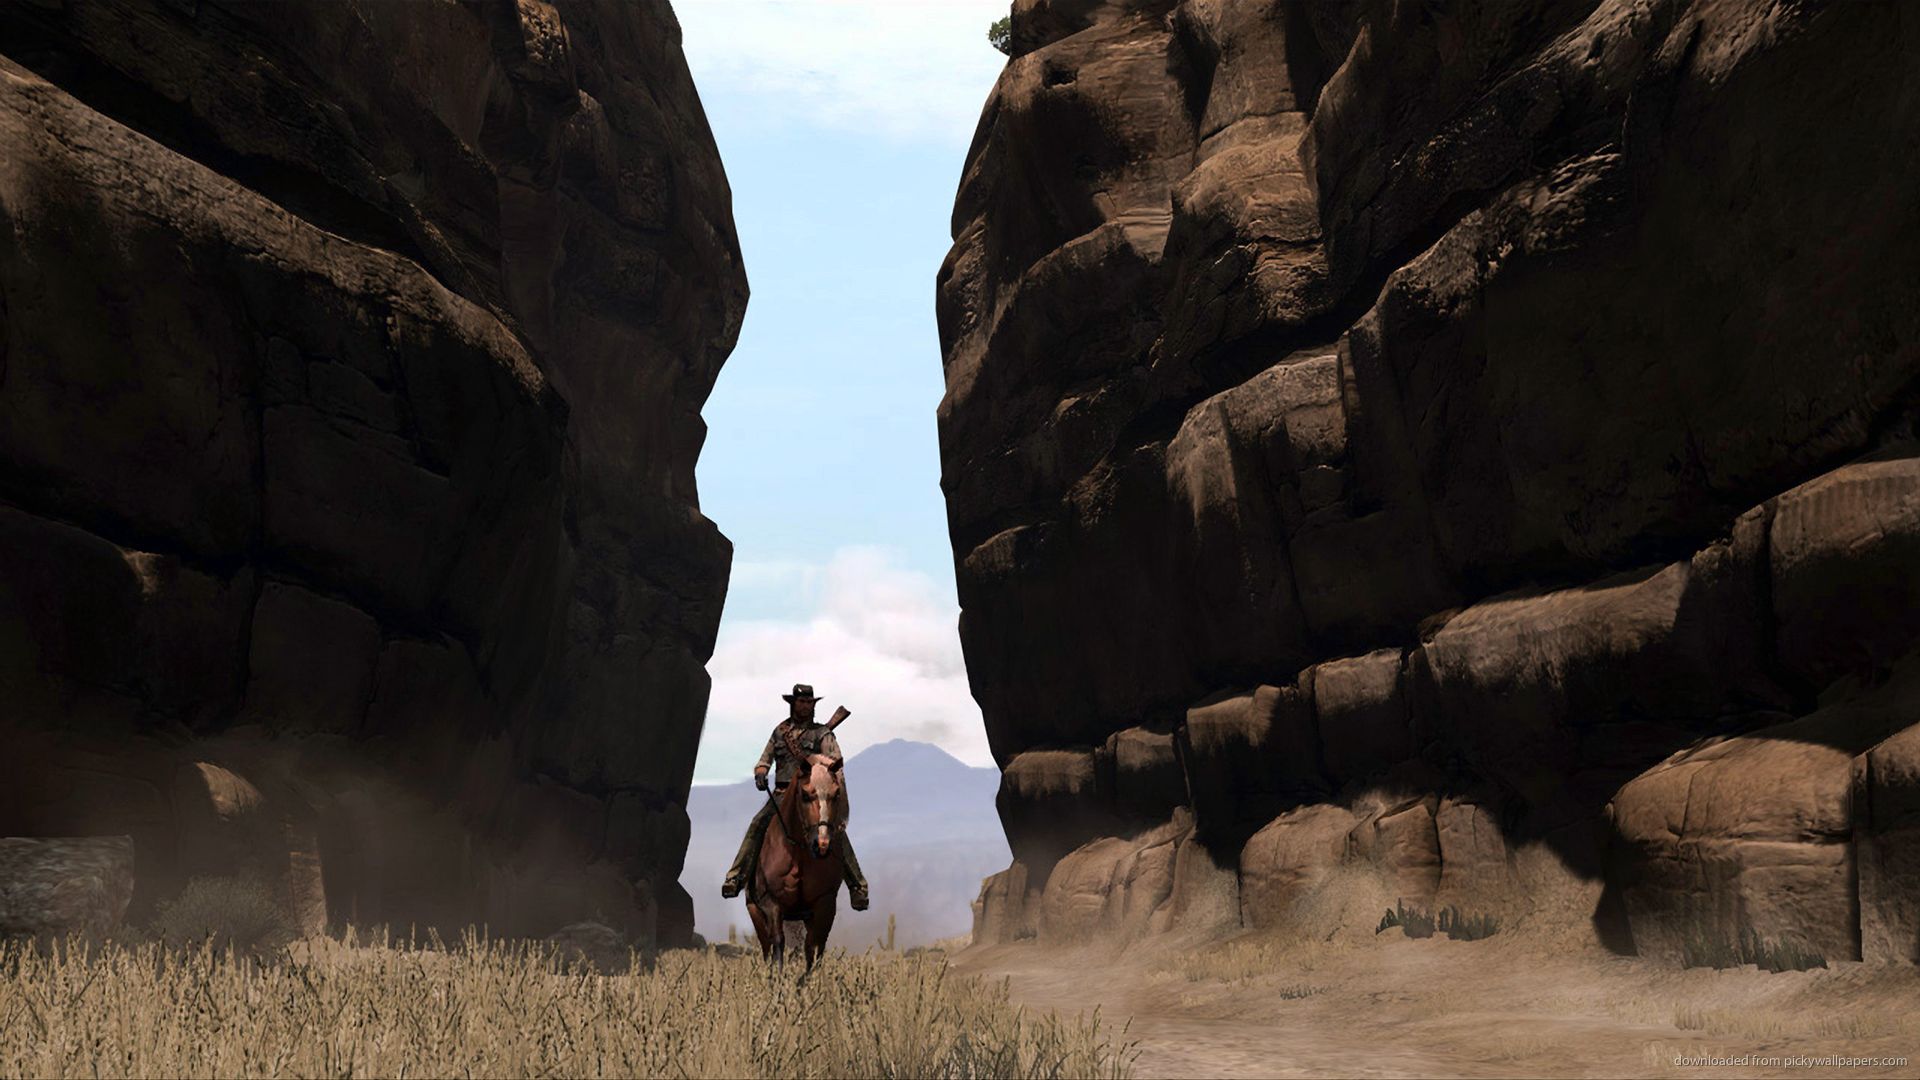 RDR Canyon Wallpaper For iPhone 3G/3GS